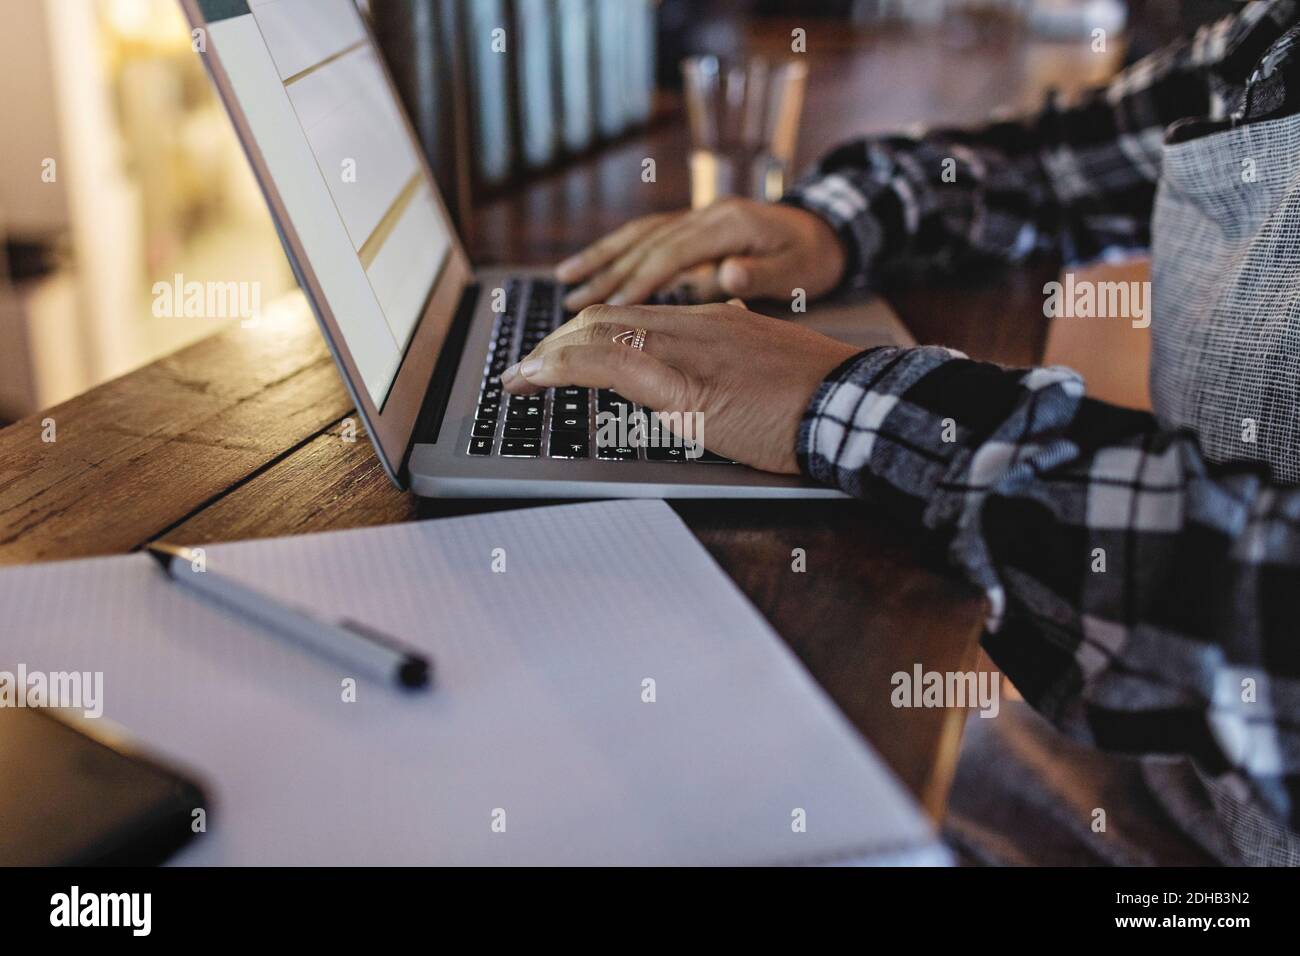 Close-up of manager using laptop at bar counter Stock Photo